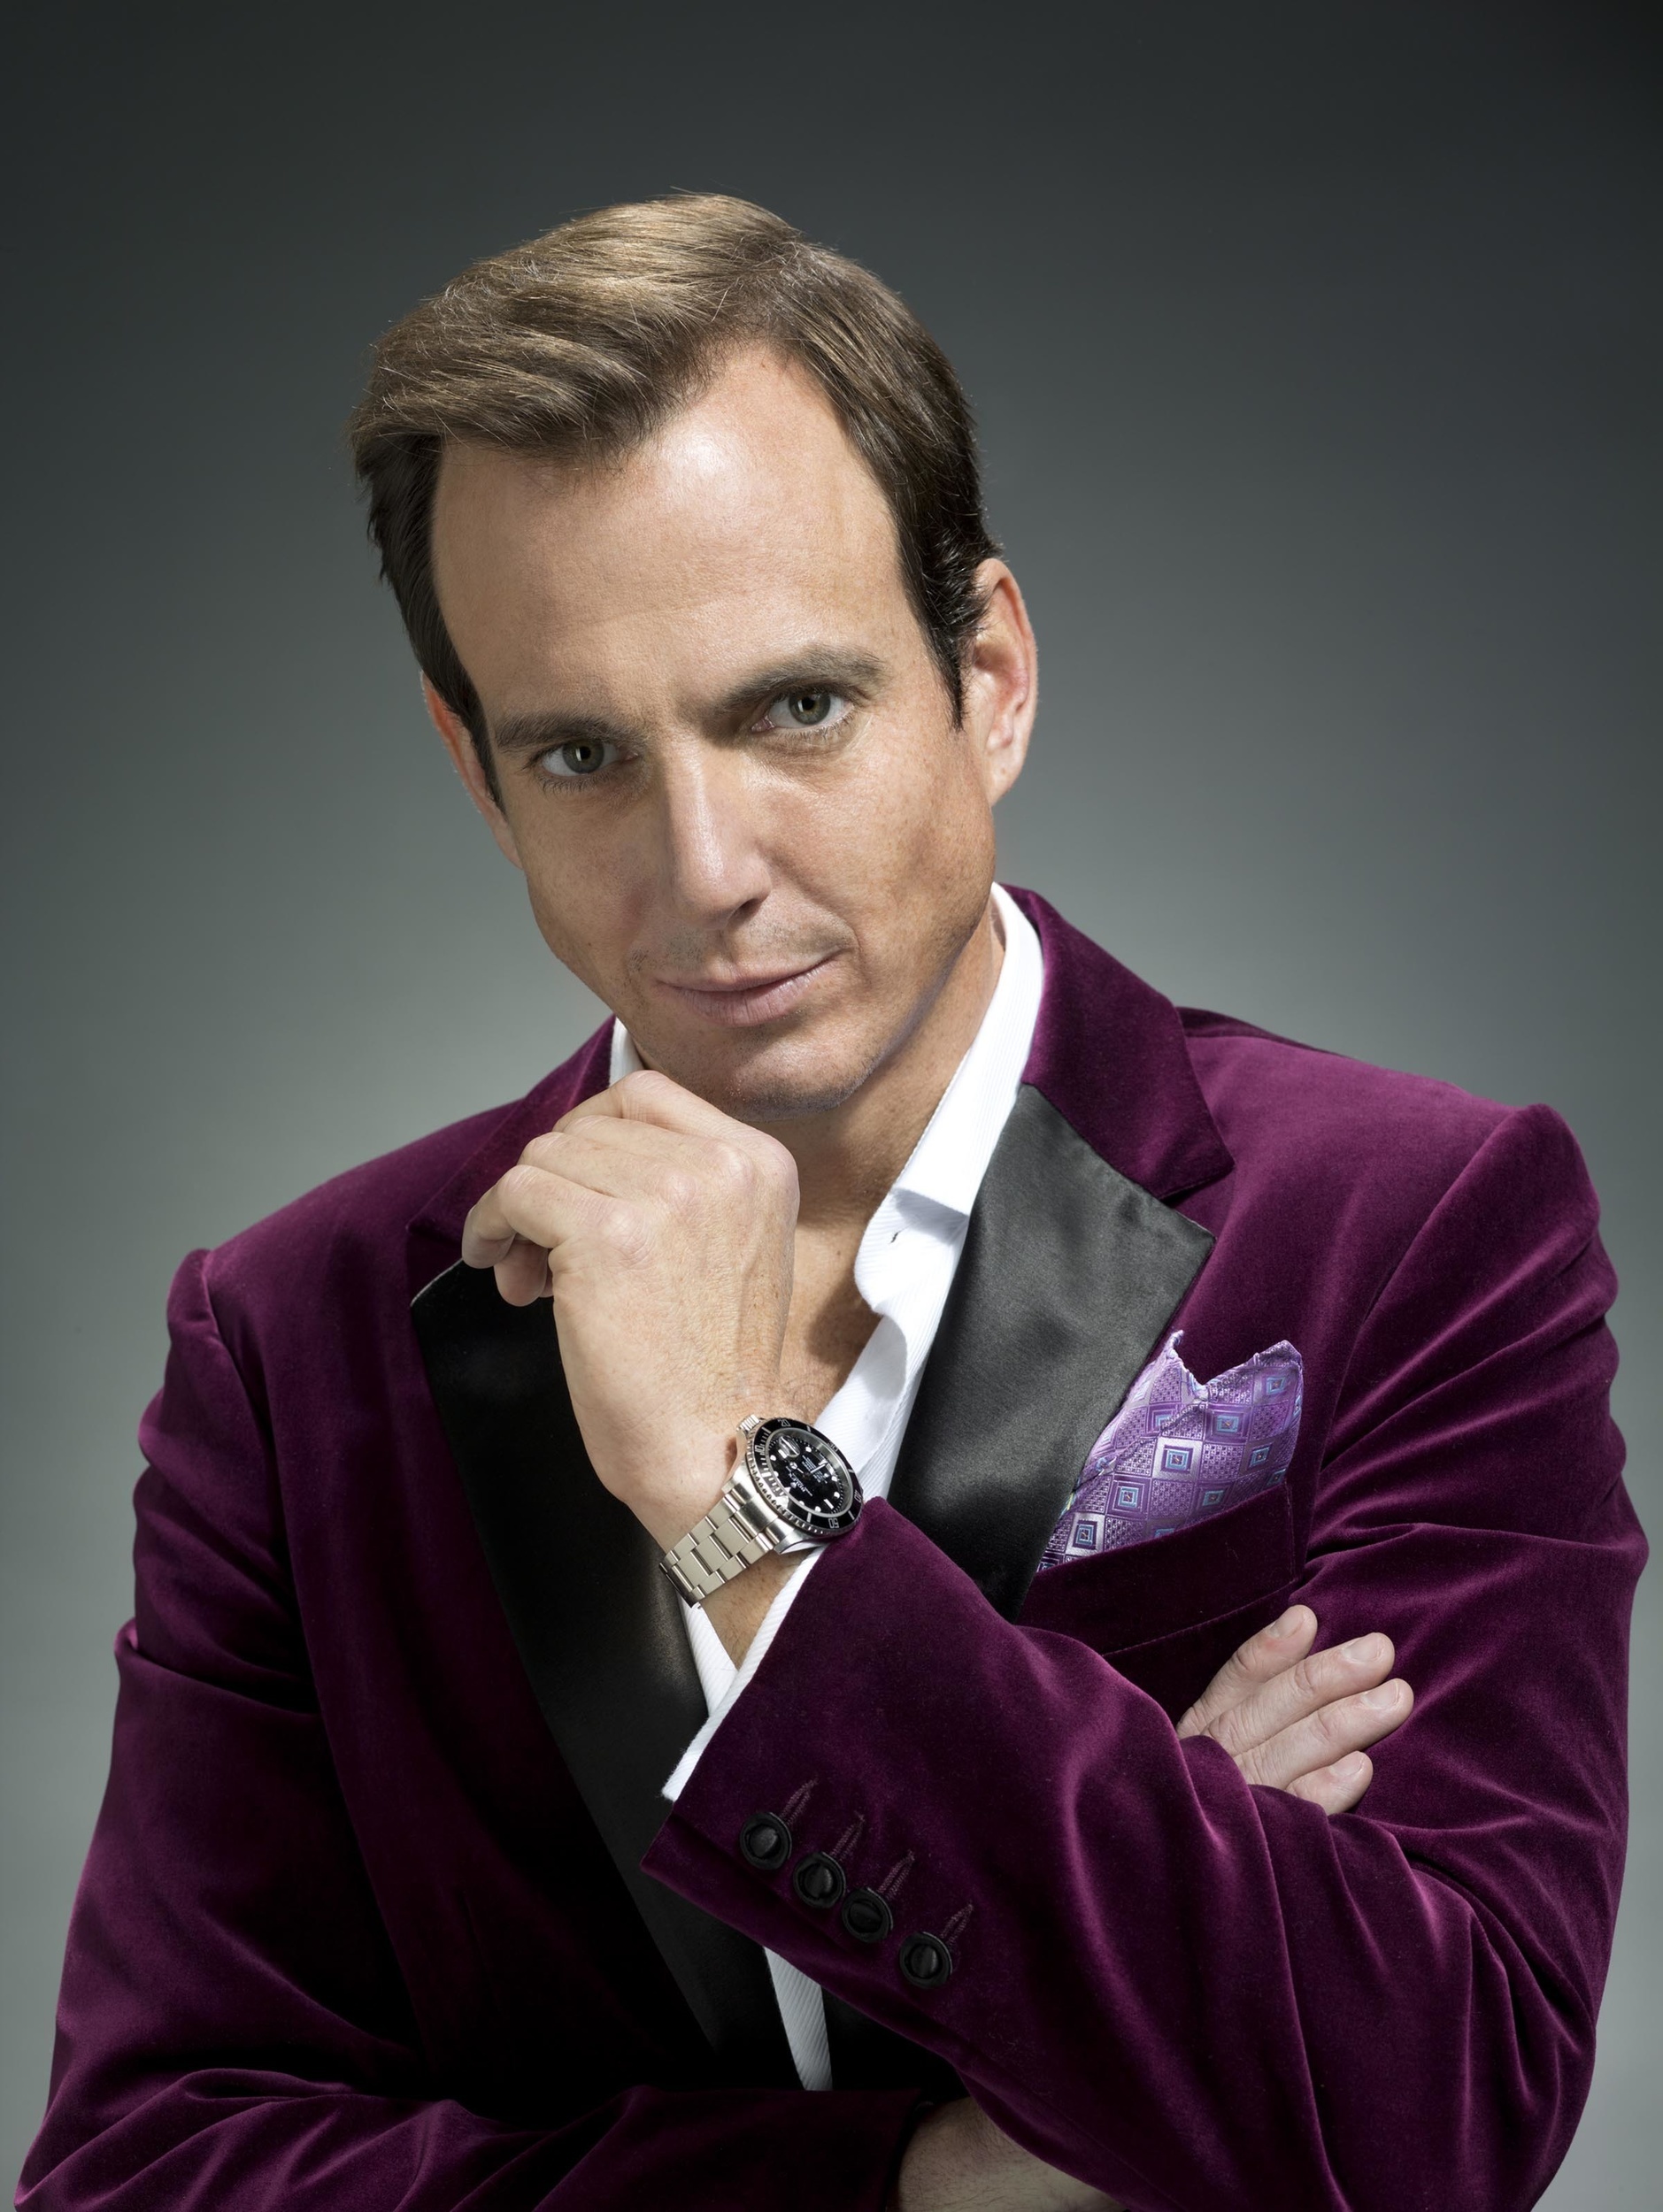 <p>When you're trying to resurrect a magic career and looking to move on from a ban by The Alliance of Magicians, one takes what he can get. G.O.B. (Will Arnett) was relegated to working here: a Chuck E. Cheese knock-off that featured rubbery pizza, overpriced arcade amusement, and someone named Spinny the Clown. G.O.B., though, was desperate and brought his saw-the-lady-in-half illusion to this below-average food and entertainment venue.</p><p><a href='https://www.msn.com/en-us/community/channel/vid-cj9pqbr0vn9in2b6ddcd8sfgpfq6x6utp44fssrv6mc2gtybw0us'>Follow us on MSN to see more of our exclusive entertainment content.</a></p>